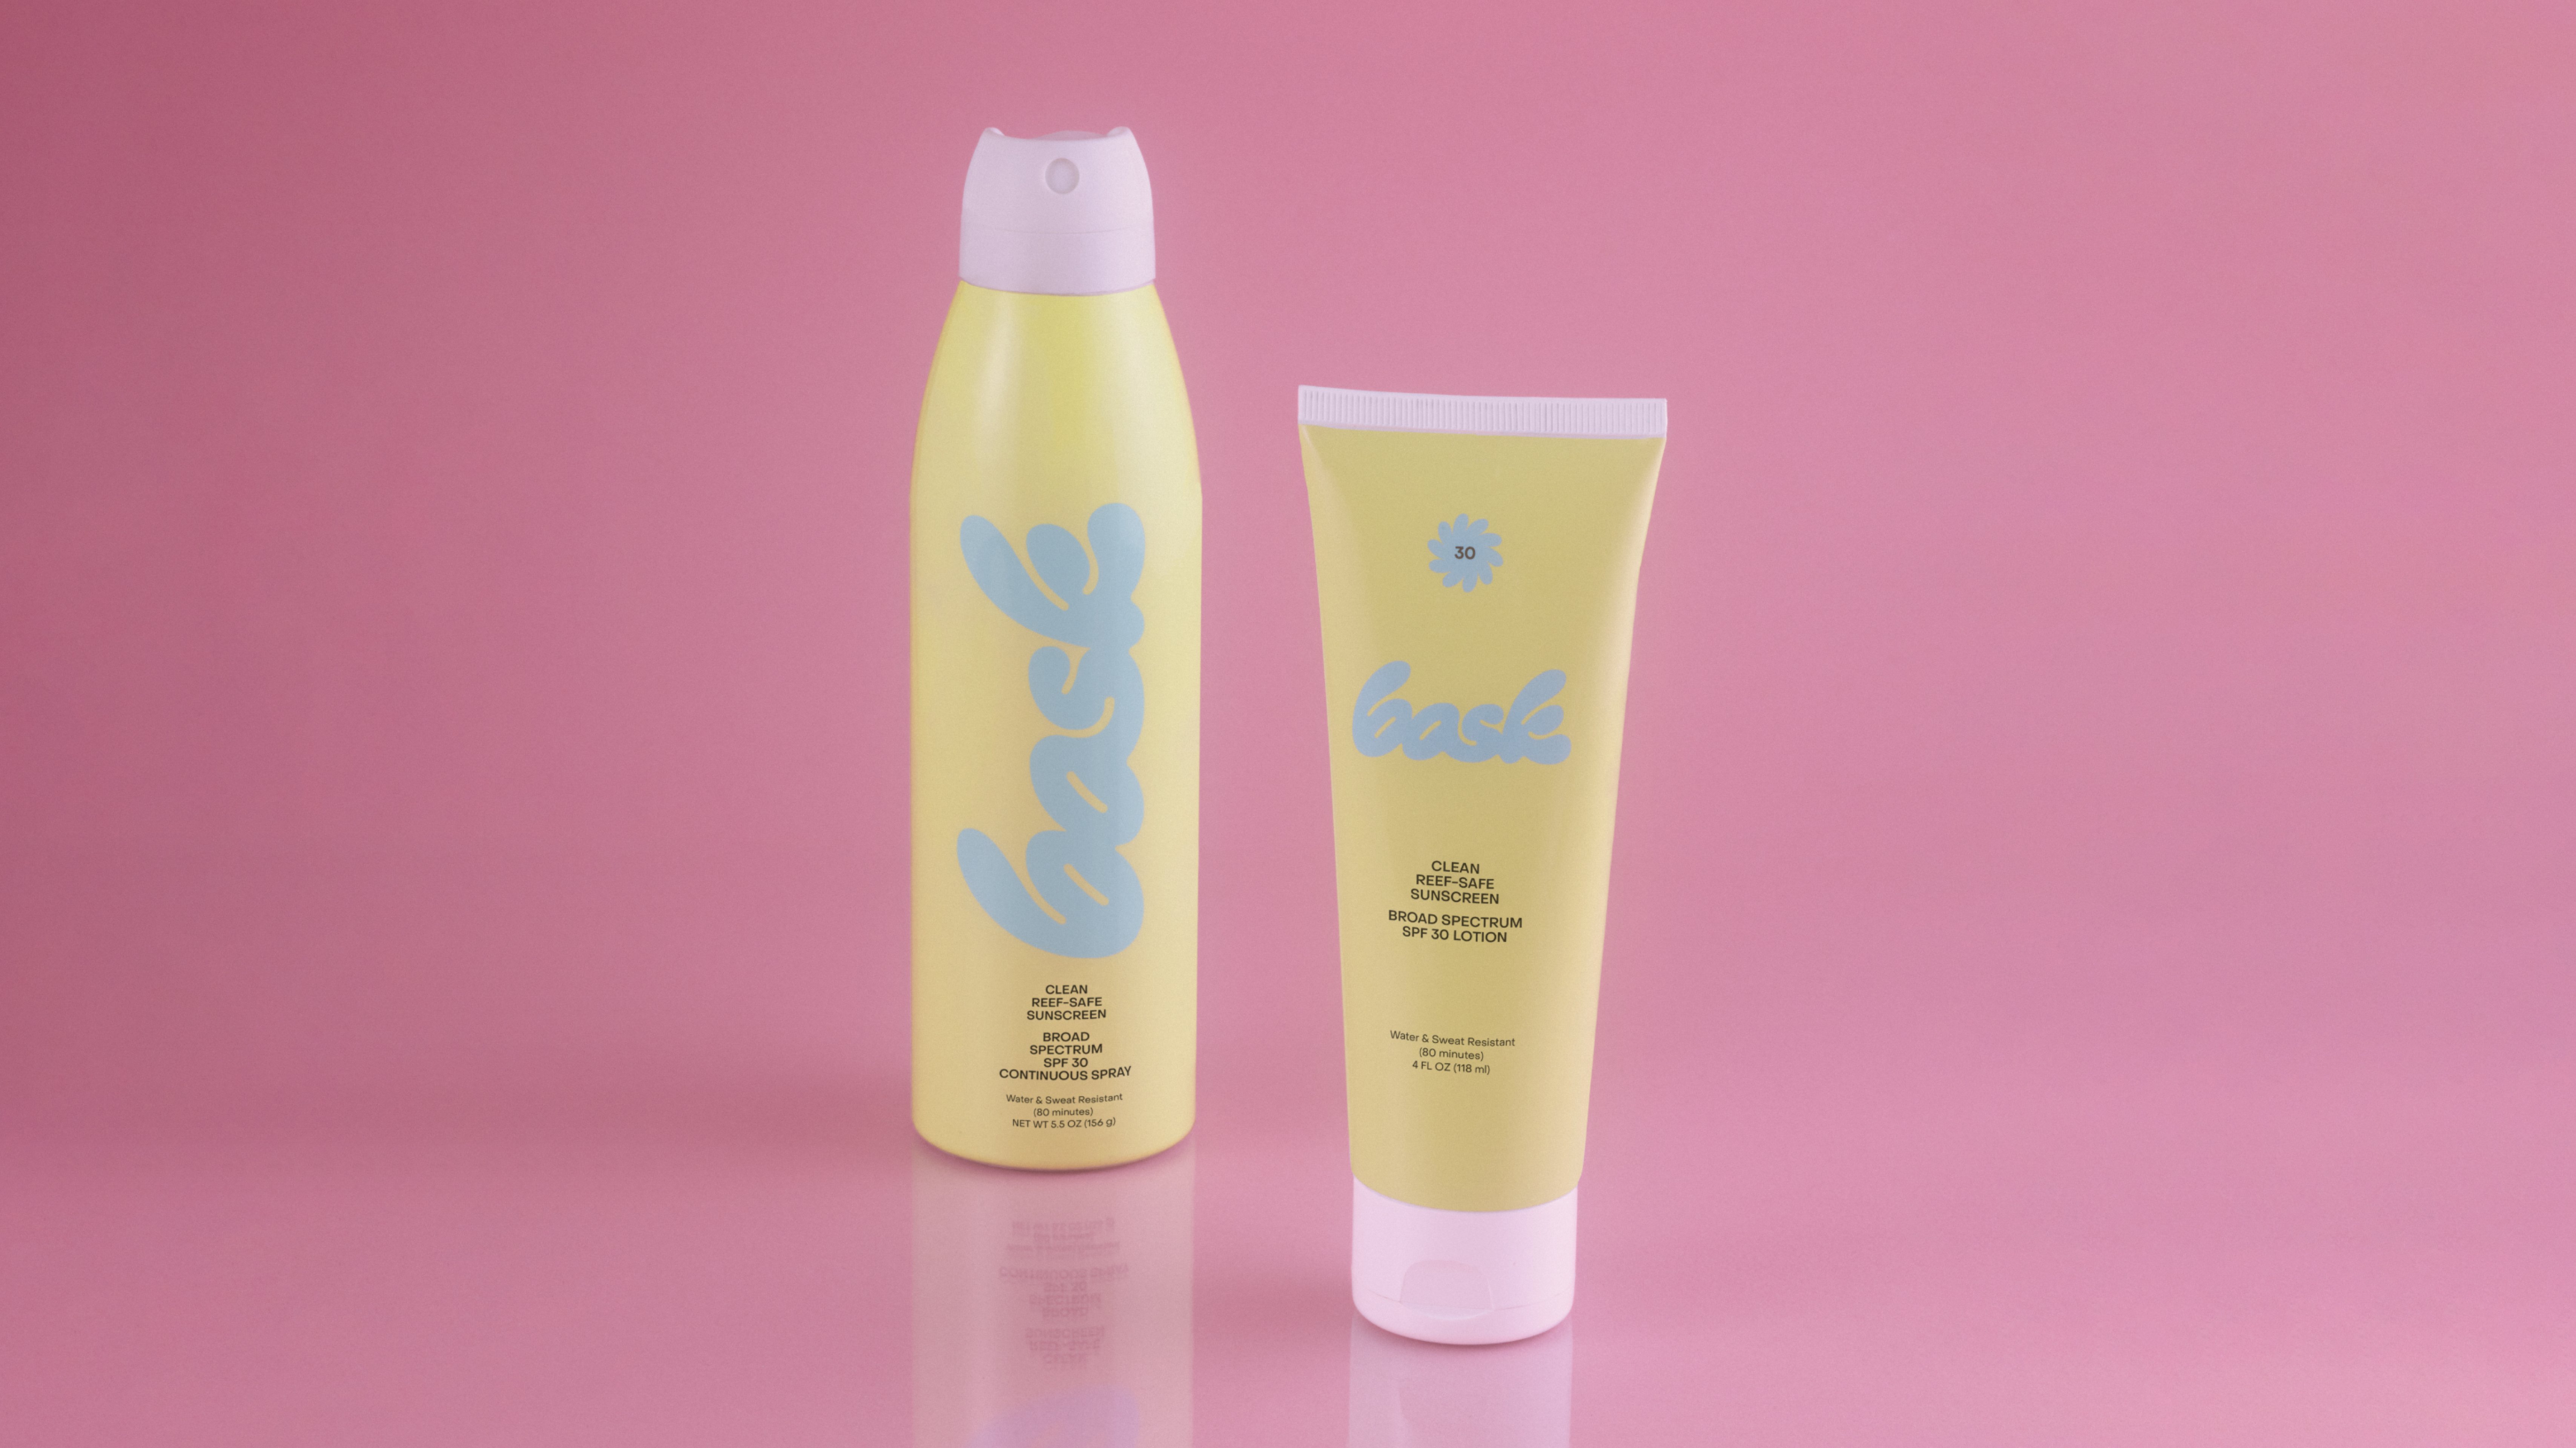 Bask Yellow Continuous Spray and Lotion Tube on a Pink background, branding and packaging design by RoAndCo